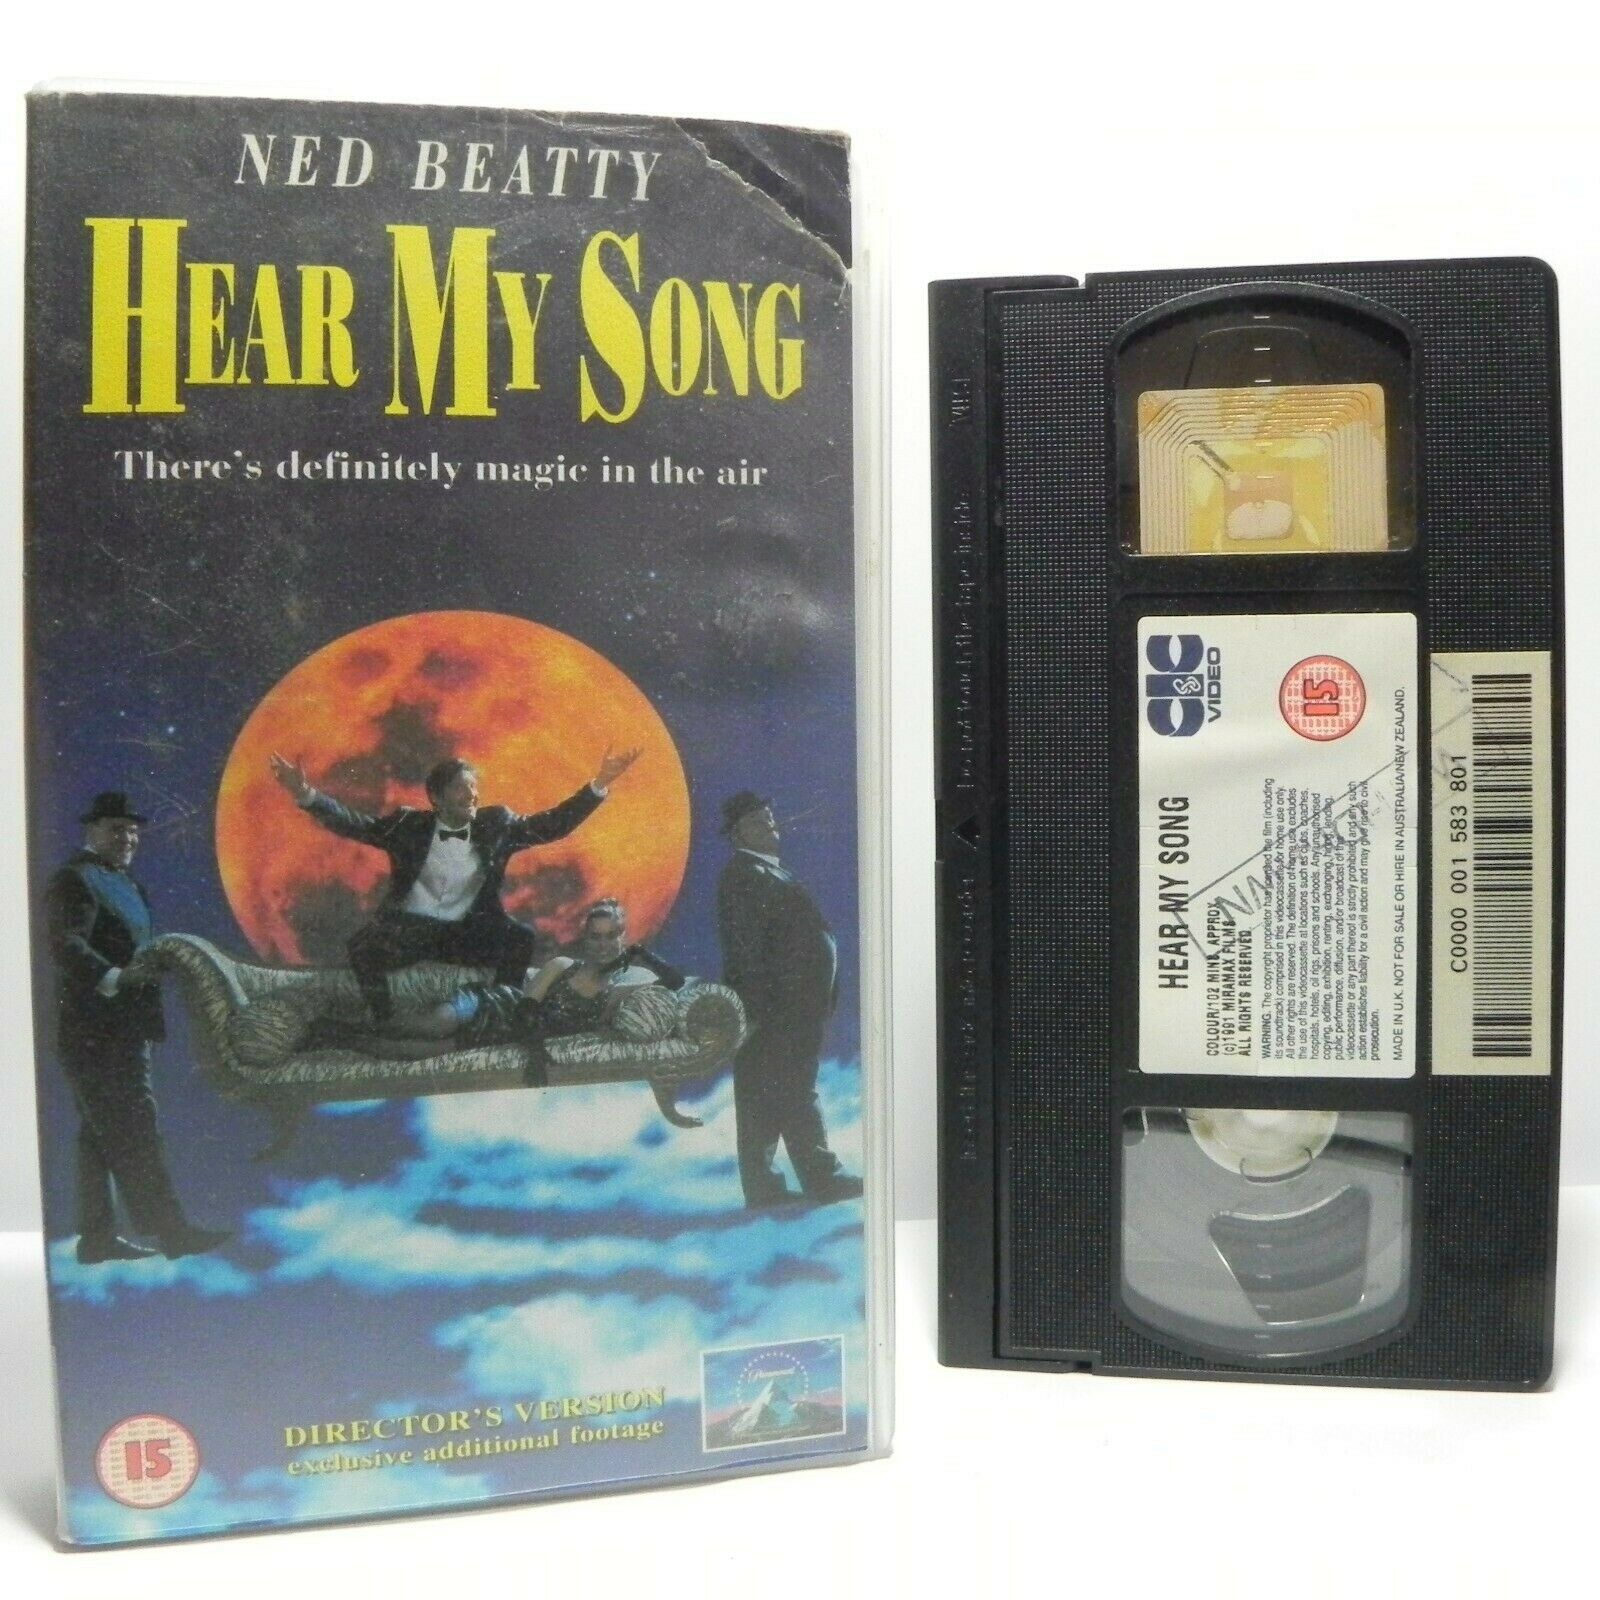 Hear My Song: Musical Comedy (1991) - Director's Version - Ned Beatty - Pal VHS-